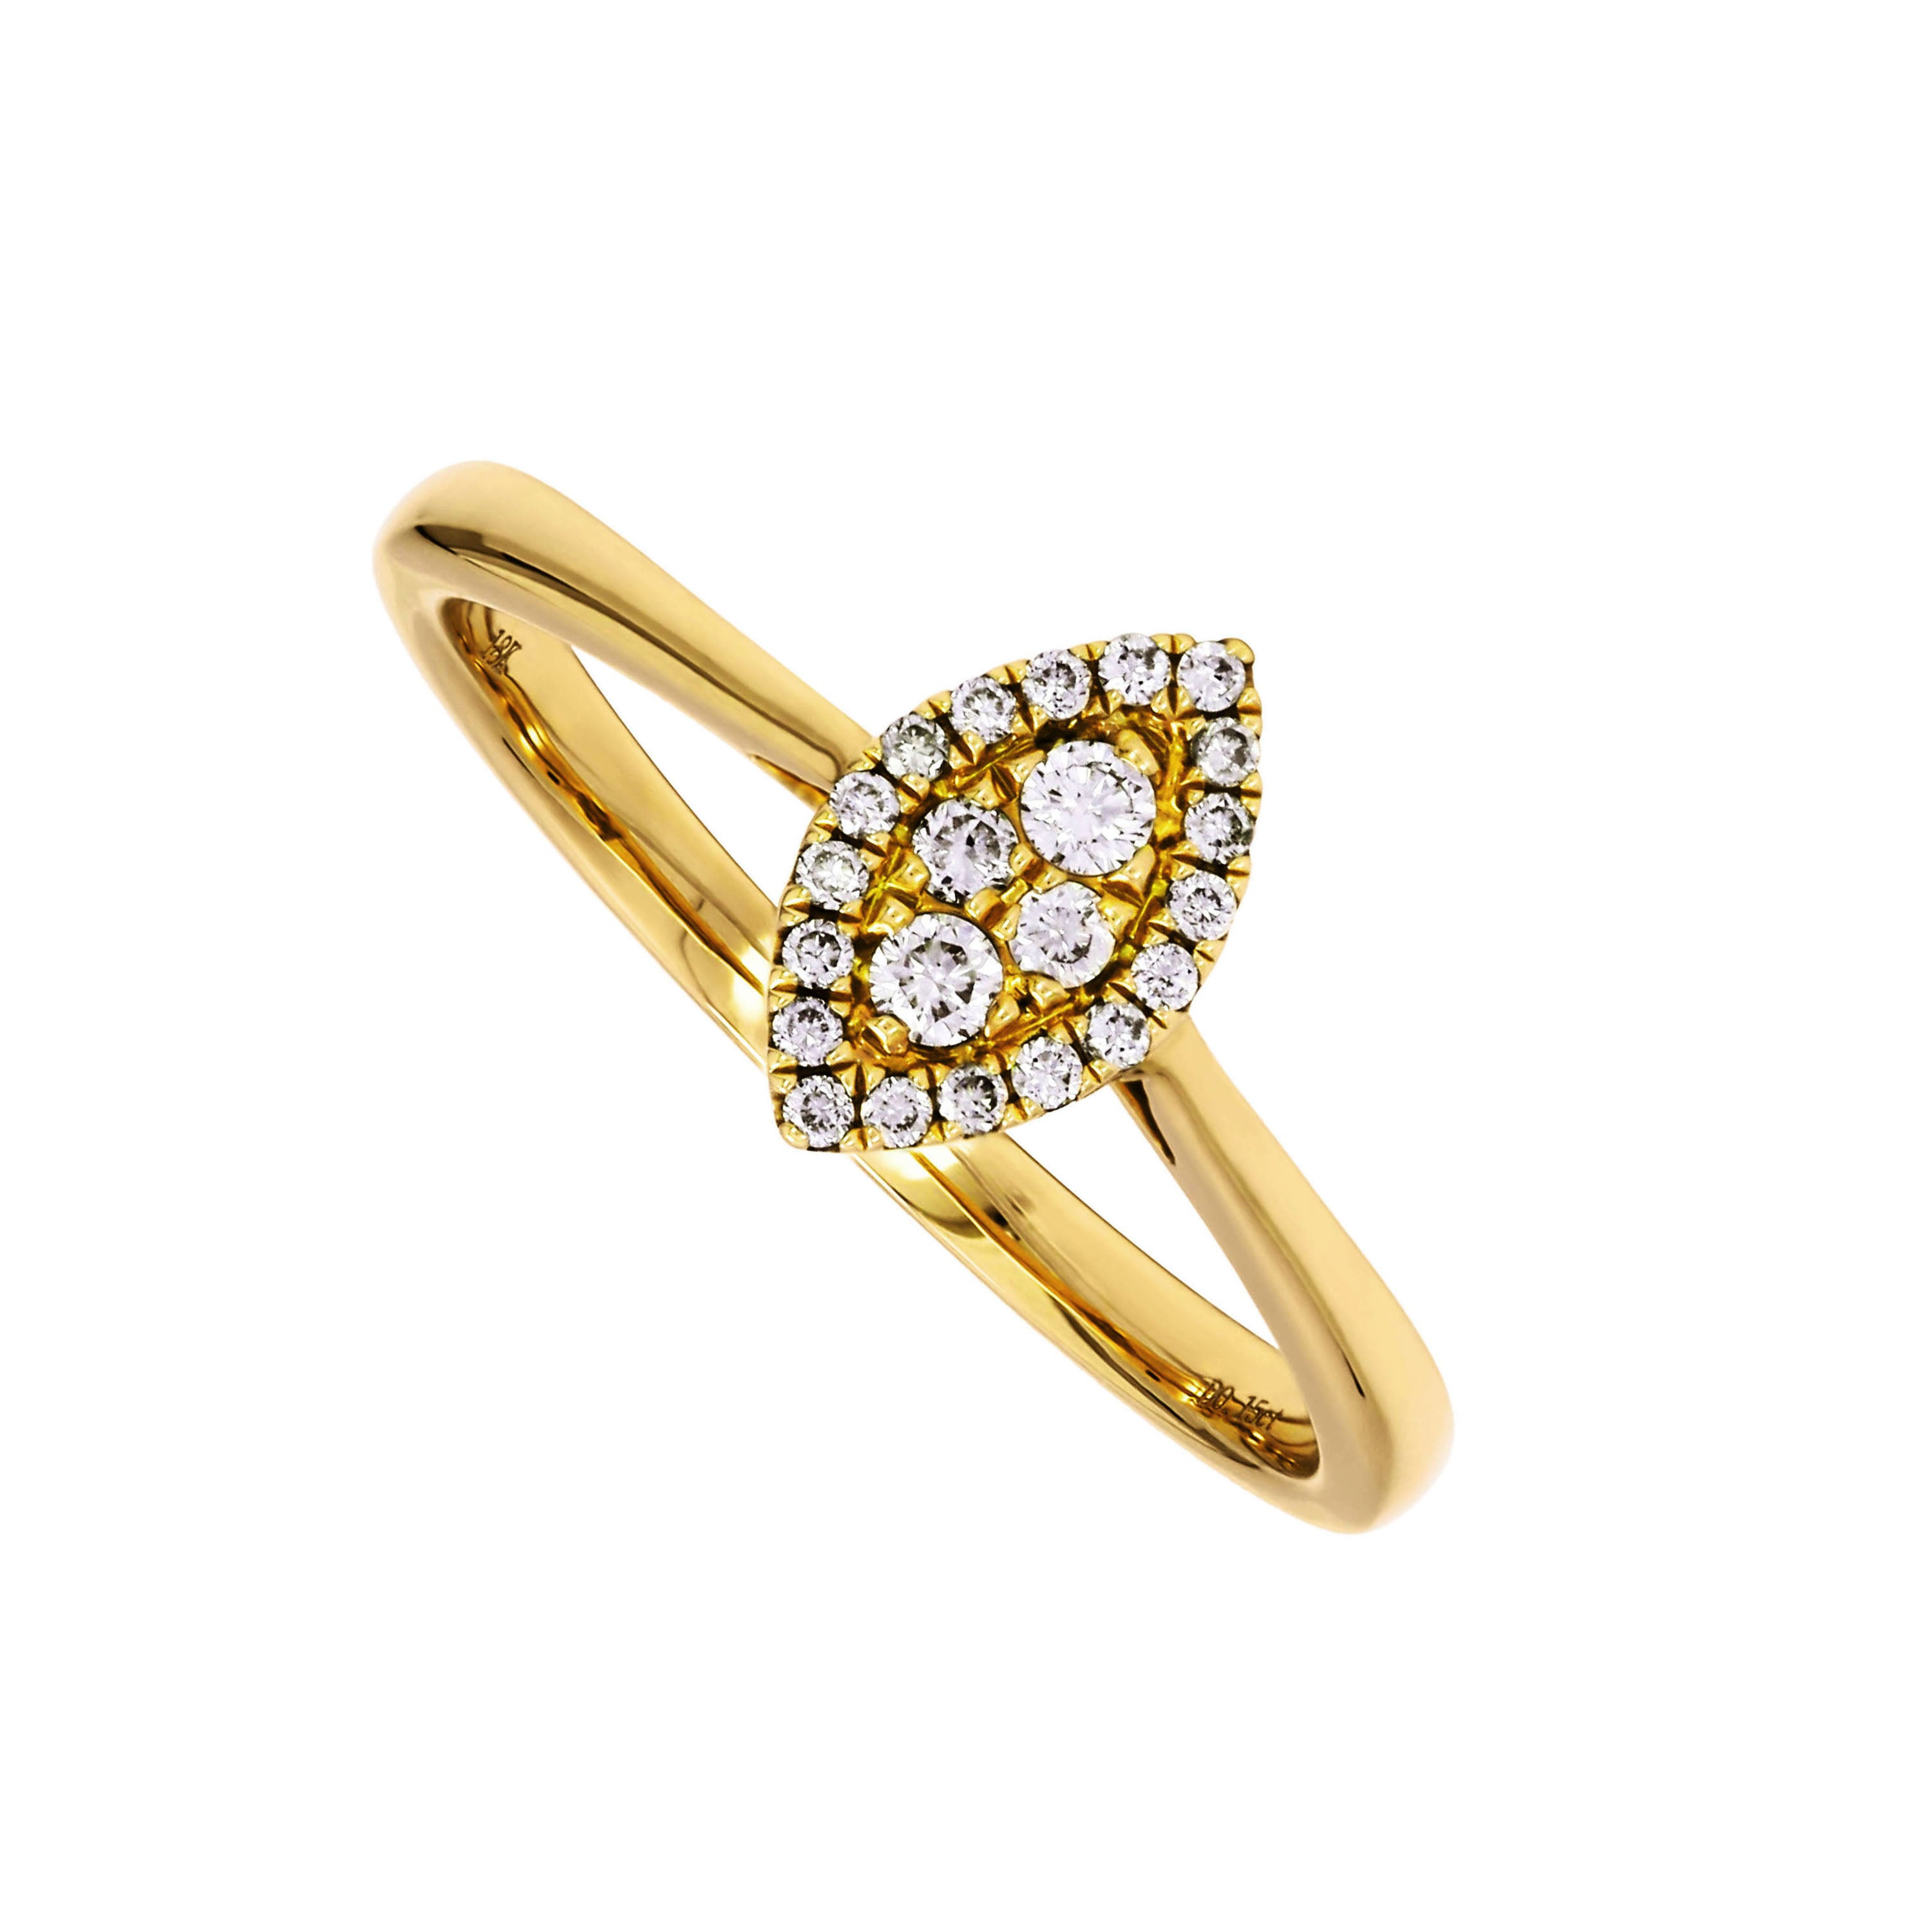 Adamar Jewels Marquise Cluster Ring in 18K yellow gold set with diamonds